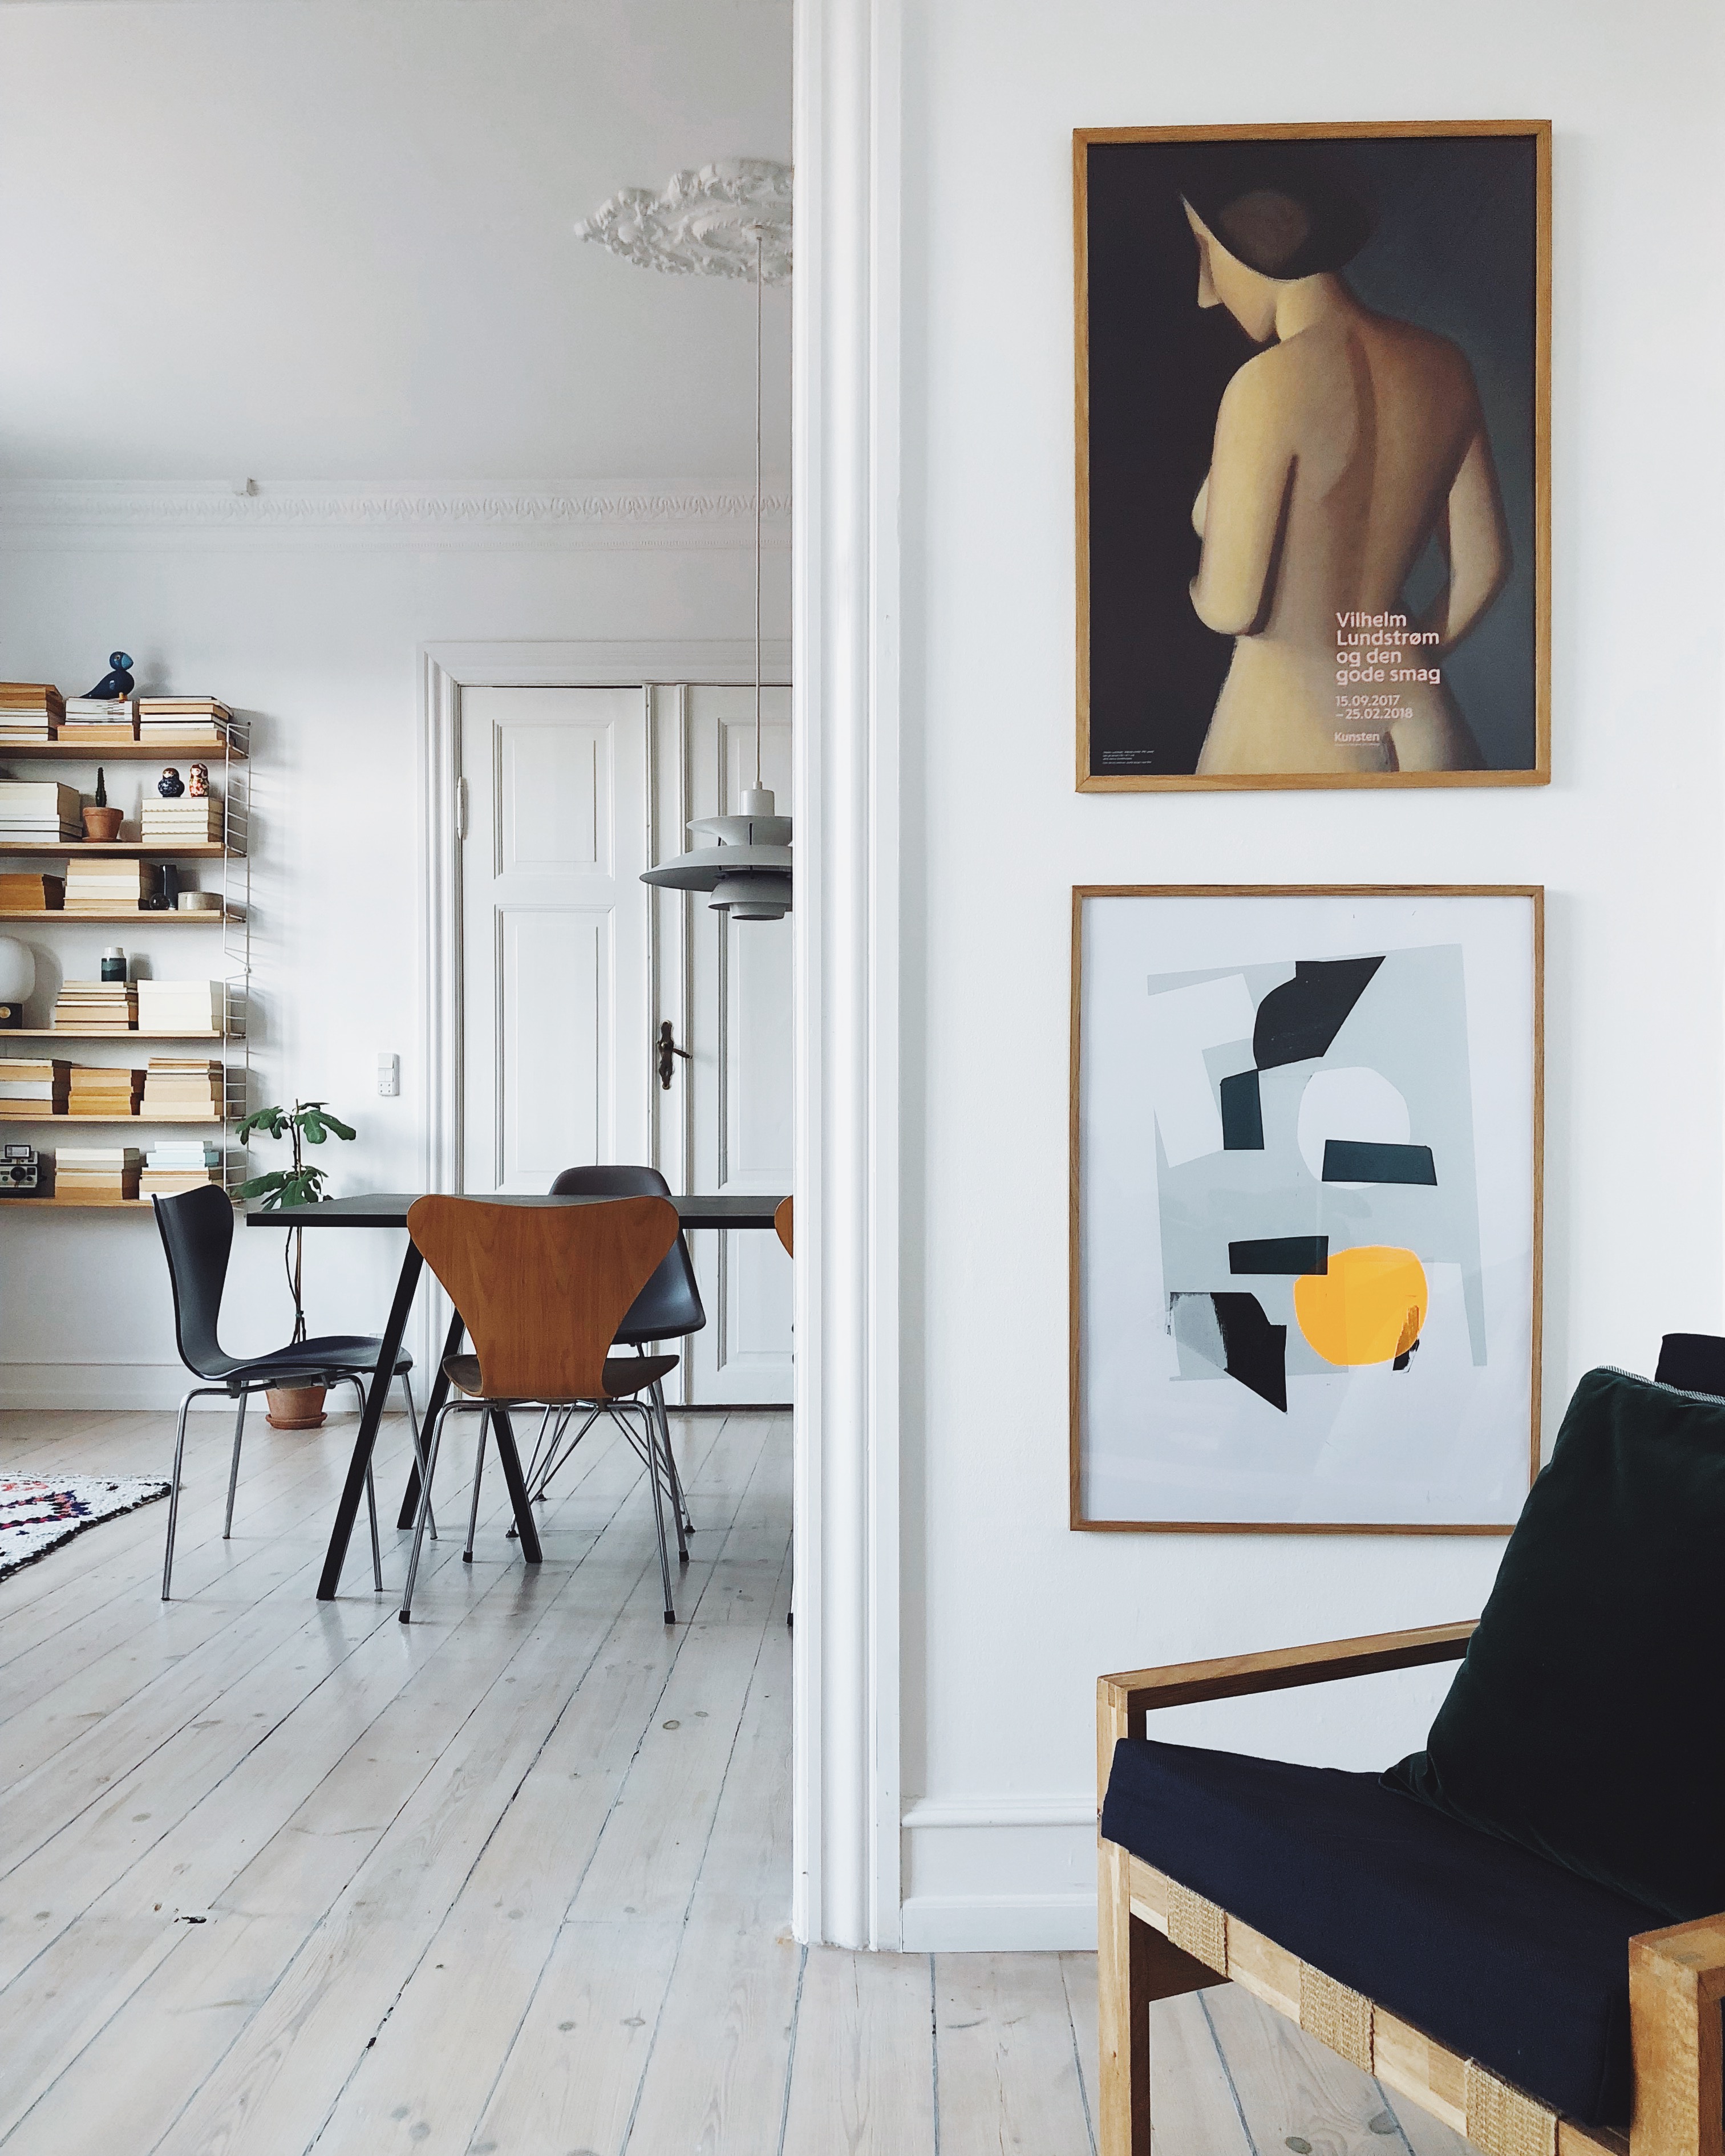 An interior mix of vintage, classic and modern styles - Copenhagen  Apartment home tour - DESIGNSETTER - Design Lifestyle and Interior Design  Magazine